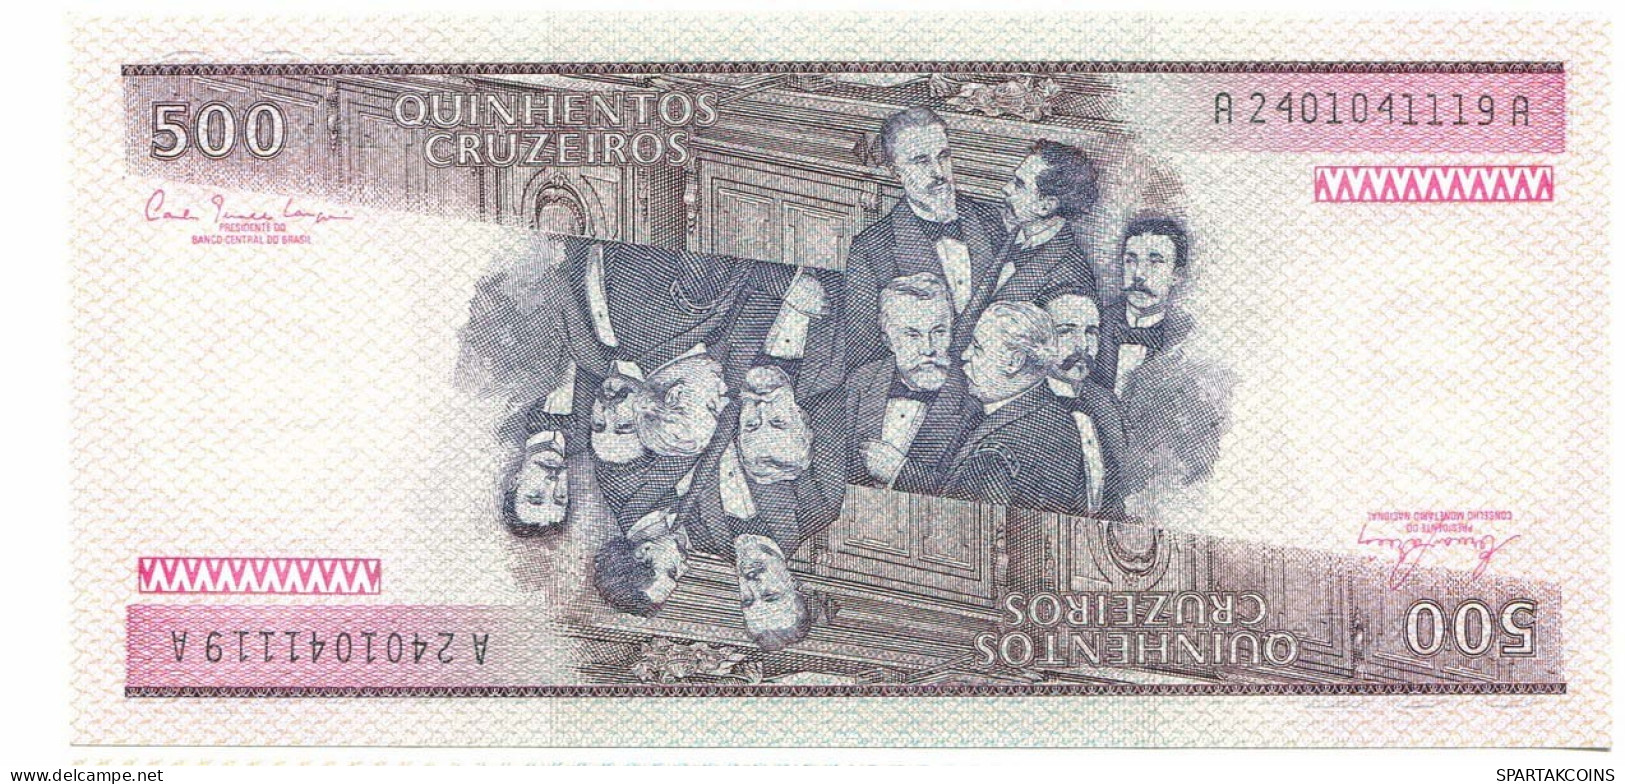 BRASIL 500 CRUZEIROS 1981 UNC Paper Money Banknote #P10864.4 - [11] Local Banknote Issues